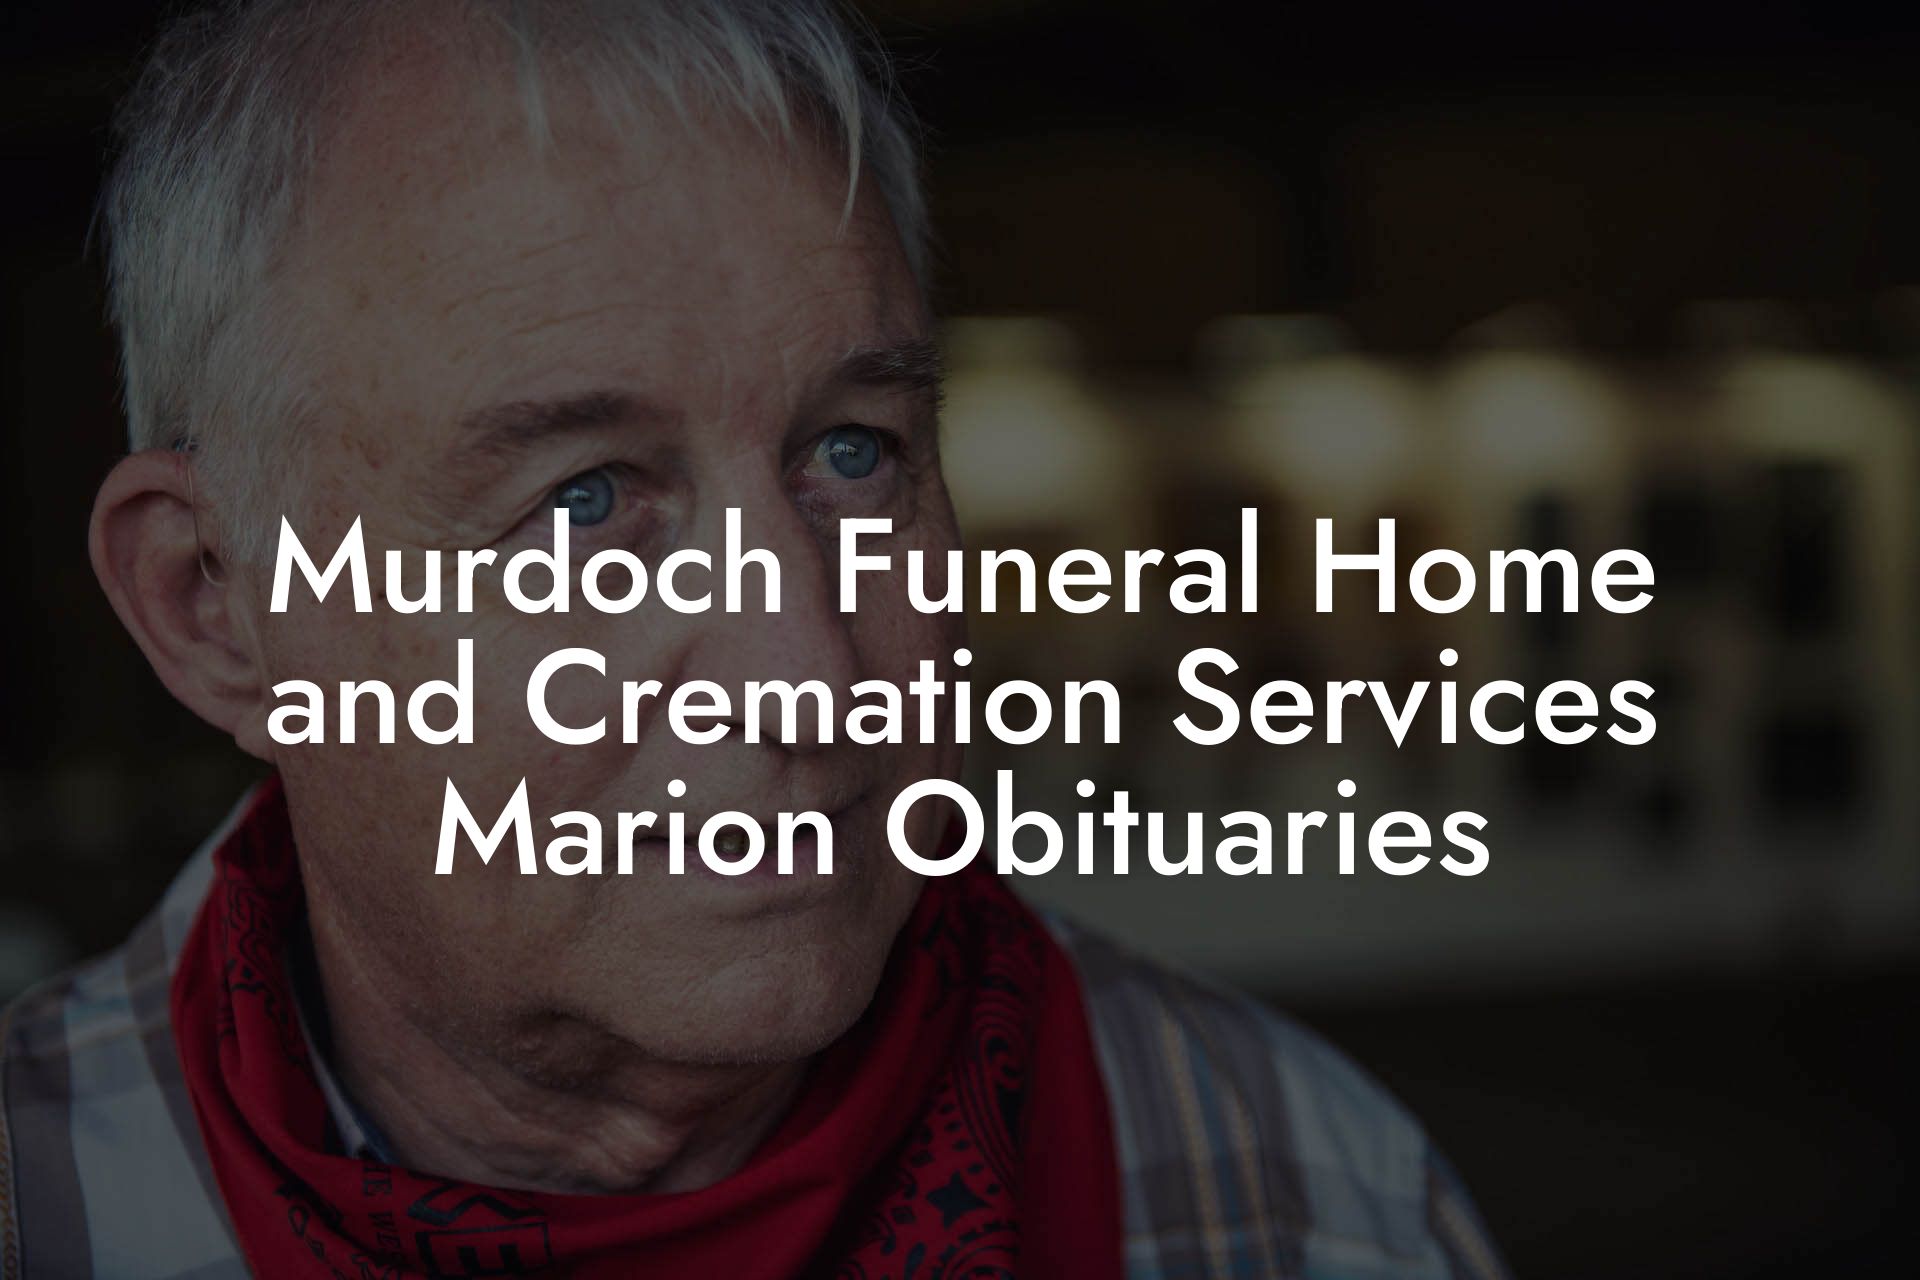 Murdoch Funeral Home and Cremation Services Marion Obituaries - Eulogy ...